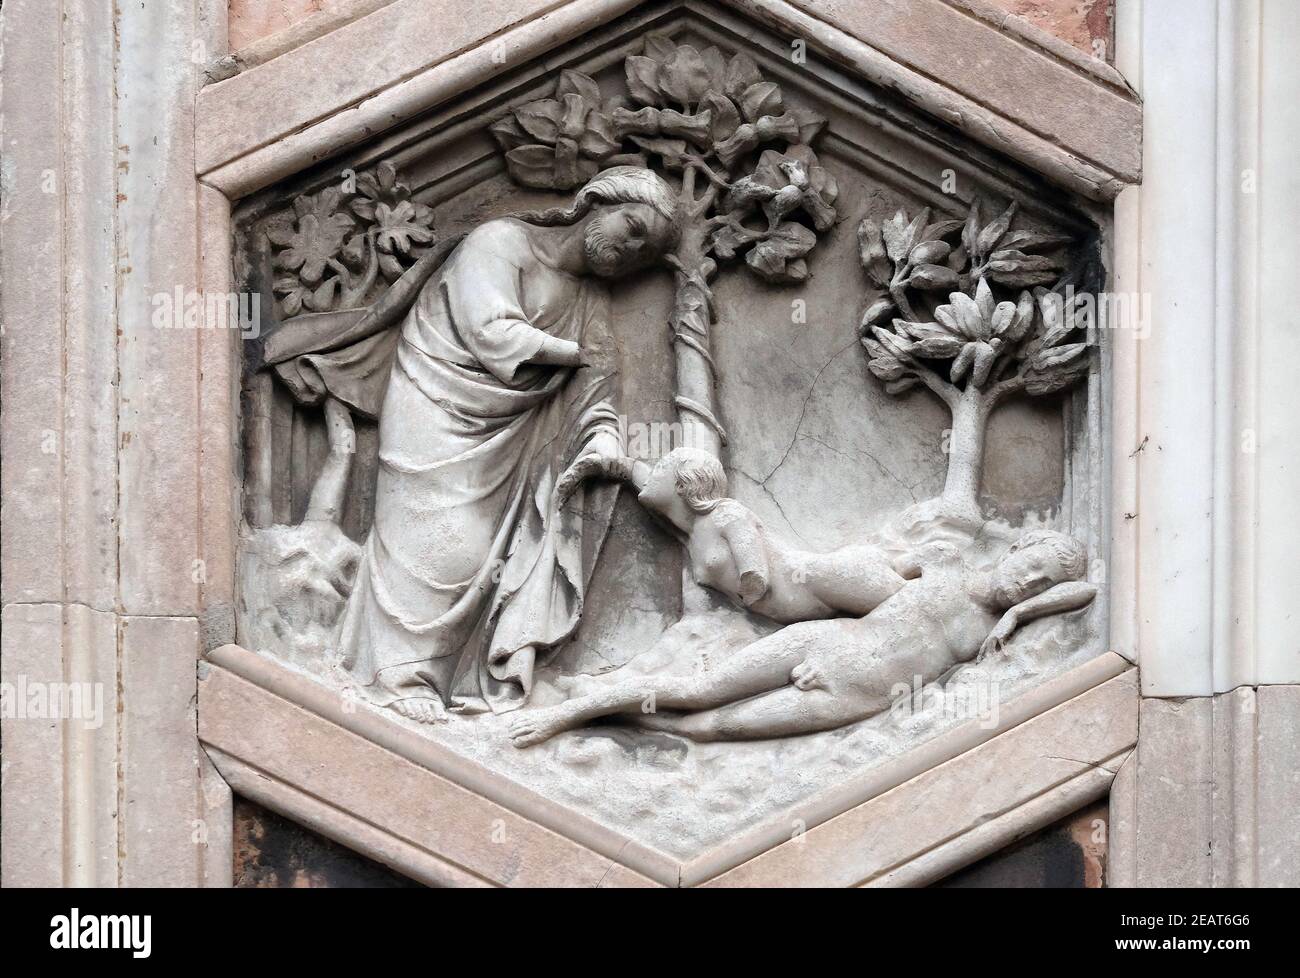 Creation of Eve by Andrea Pisano, 1334-36., Relief on Giotto Campanile of Cattedrale di Santa Maria del Fiore (Cathedral of Saint Mary of the Flower), Florence, Italy Stock Photo